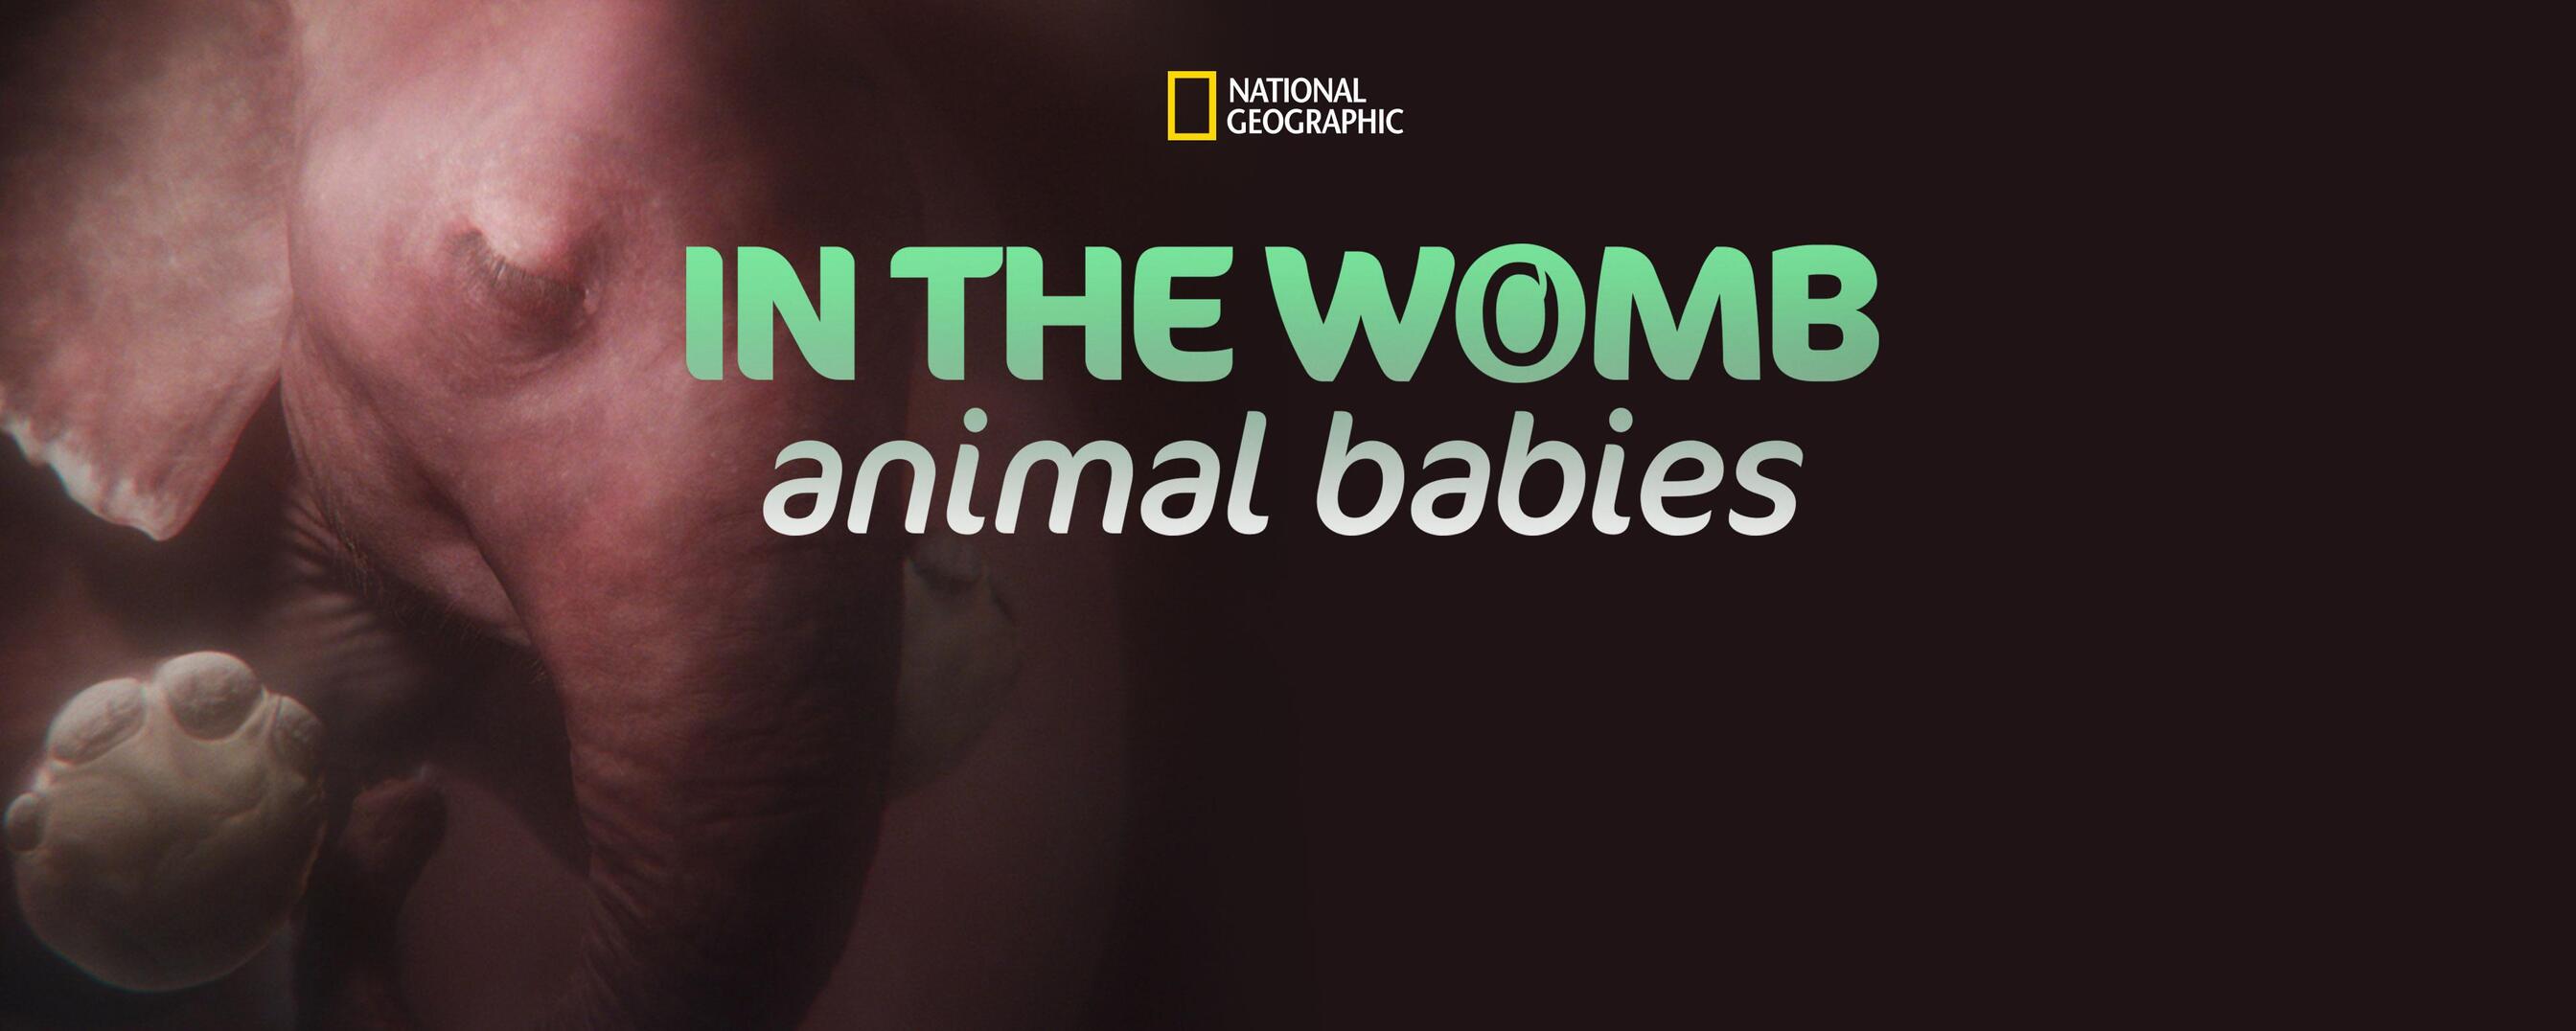 Watch In the Womb: Animal Babies TV Show - Streaming Online | Nat Geo TV